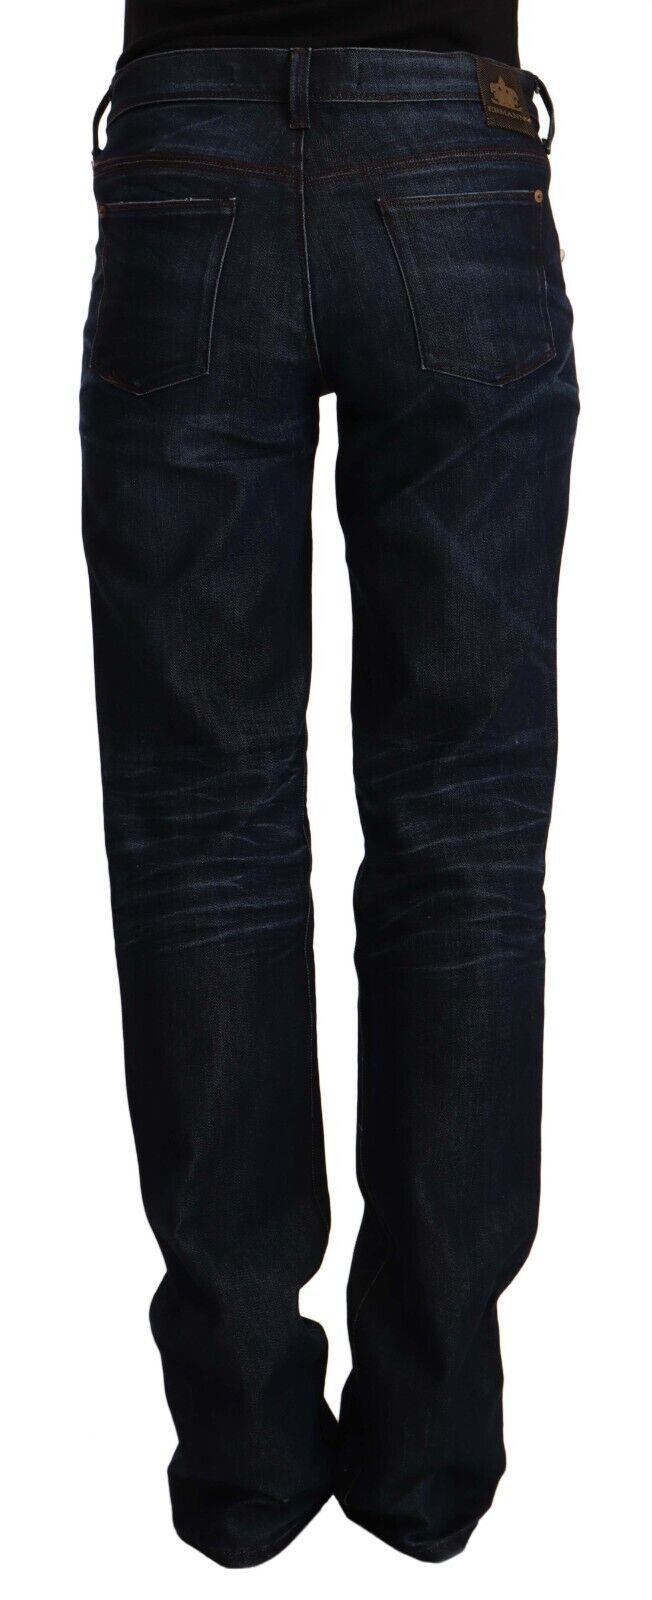 Dark Blue Mid Waist Cotton Denim Straight Jeans - Designed by Ermanno Scervino Available to Buy at a Discounted Price on Moon Behind The Hill Online Designer Discount Store